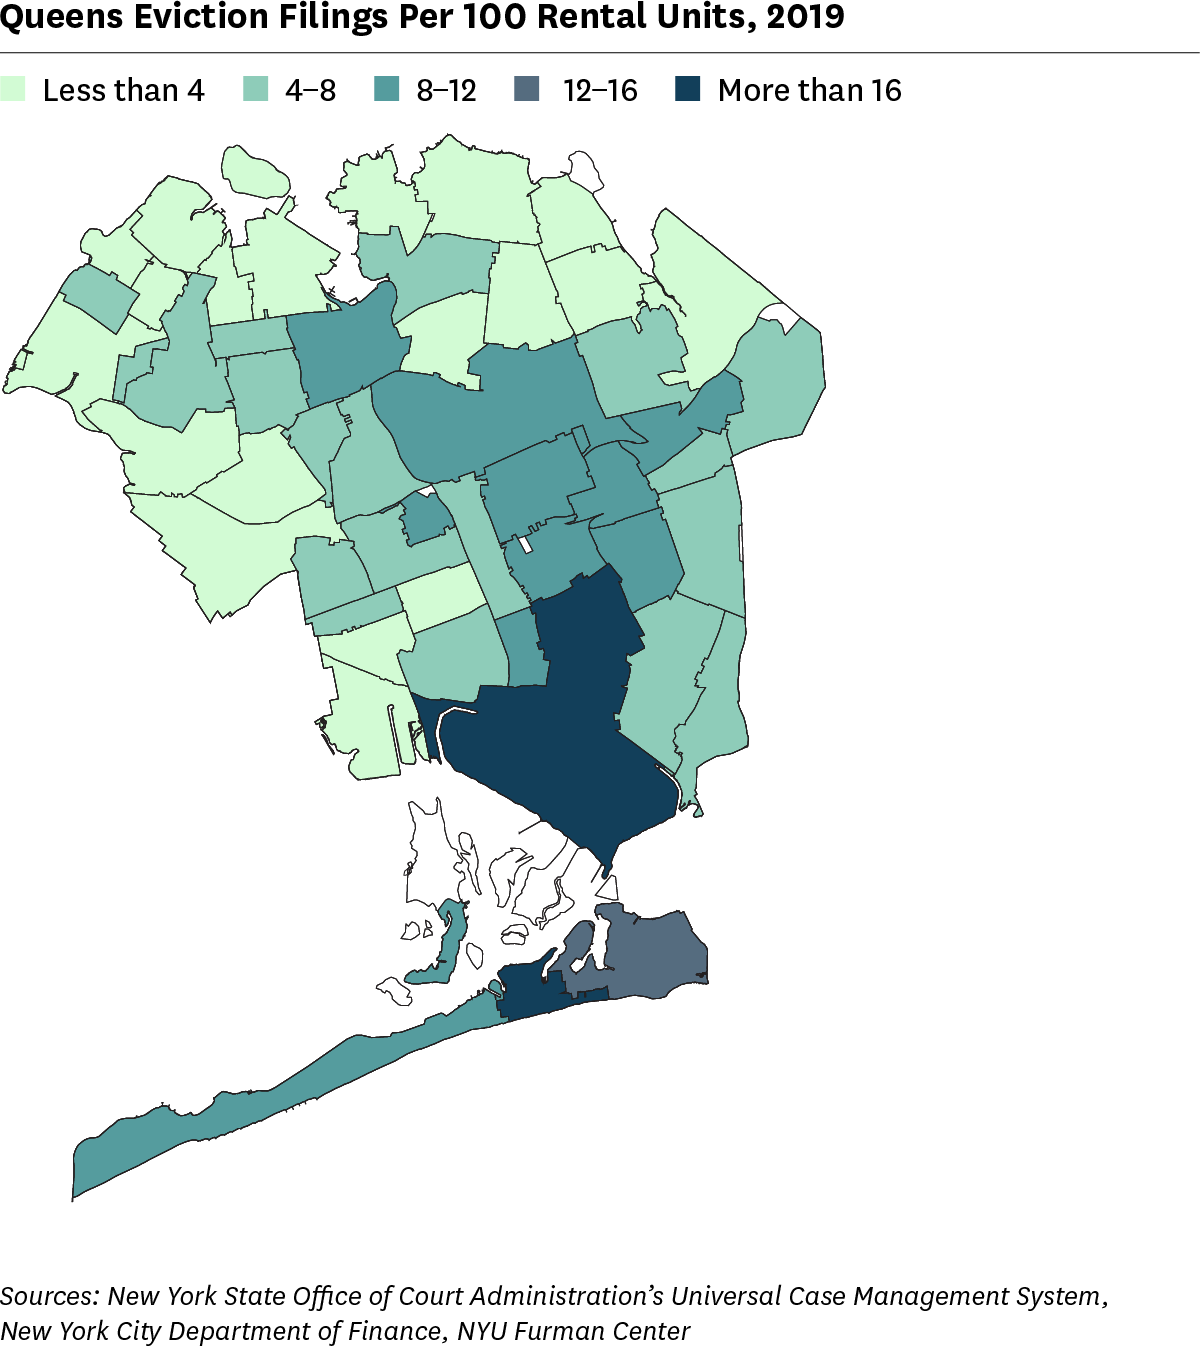 Map showing 2019 eviction filing rates for ZIP Code areas in Queens